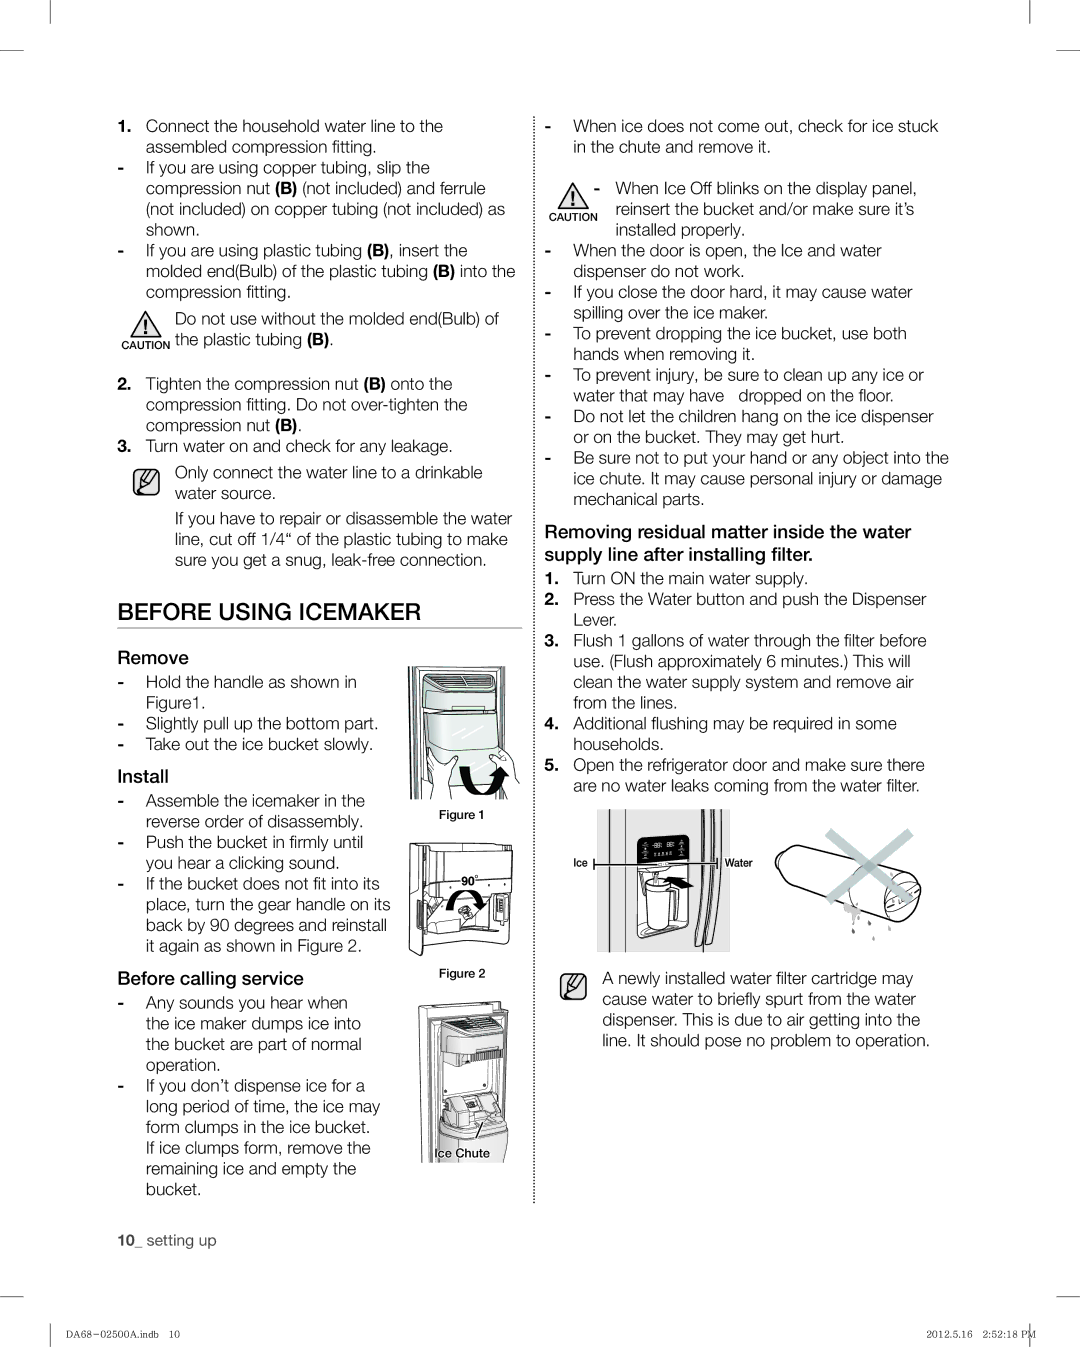 Samsung RSG307AAWP, RSG307AABP user manual Before Using Icemaker, Remove, Install, Before calling service 